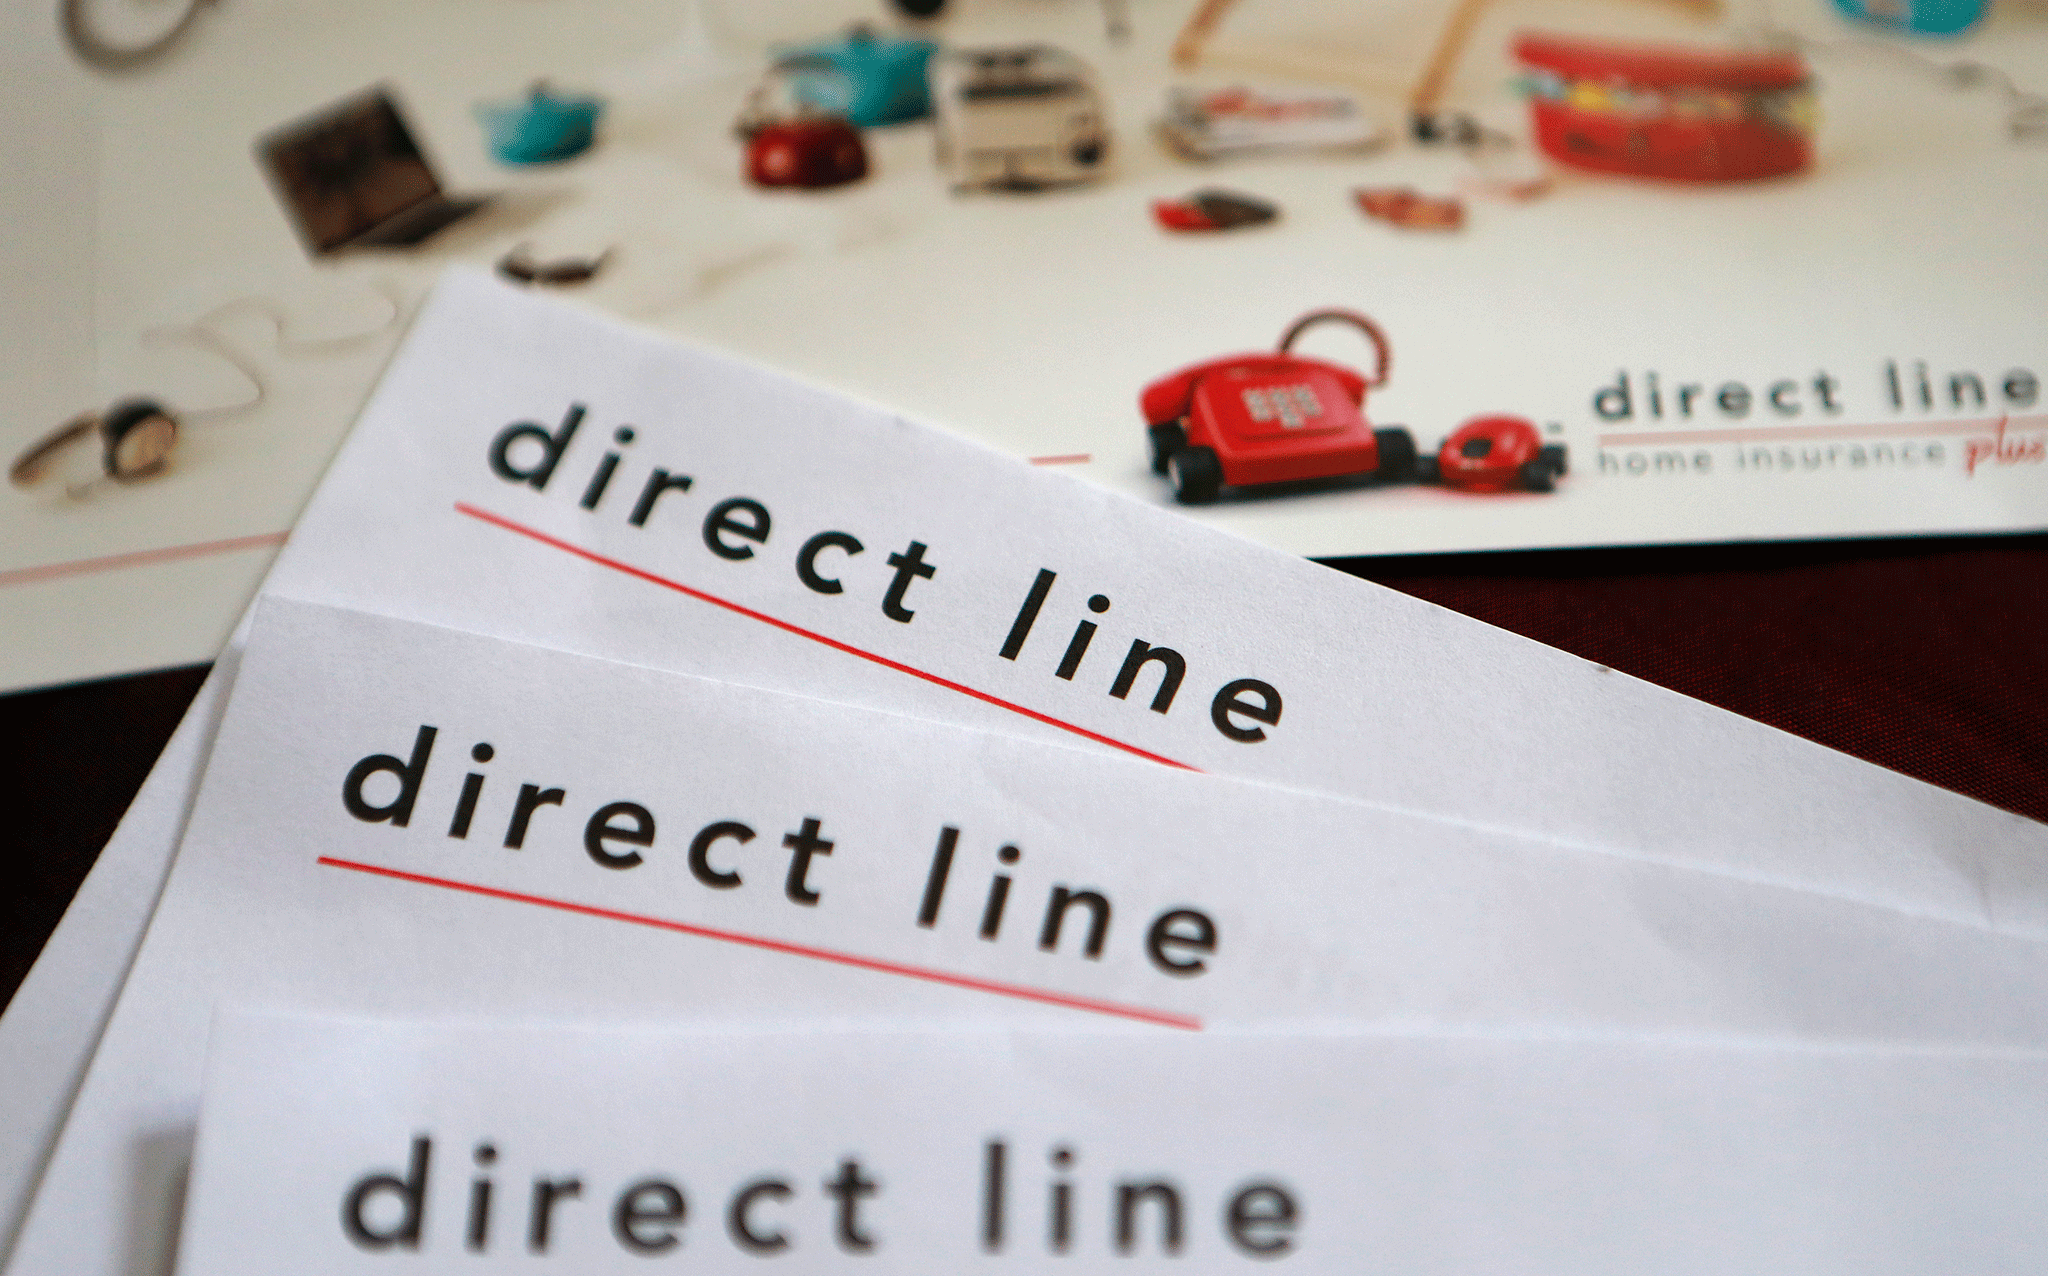 Direct Line: Its results are very good for shareholders